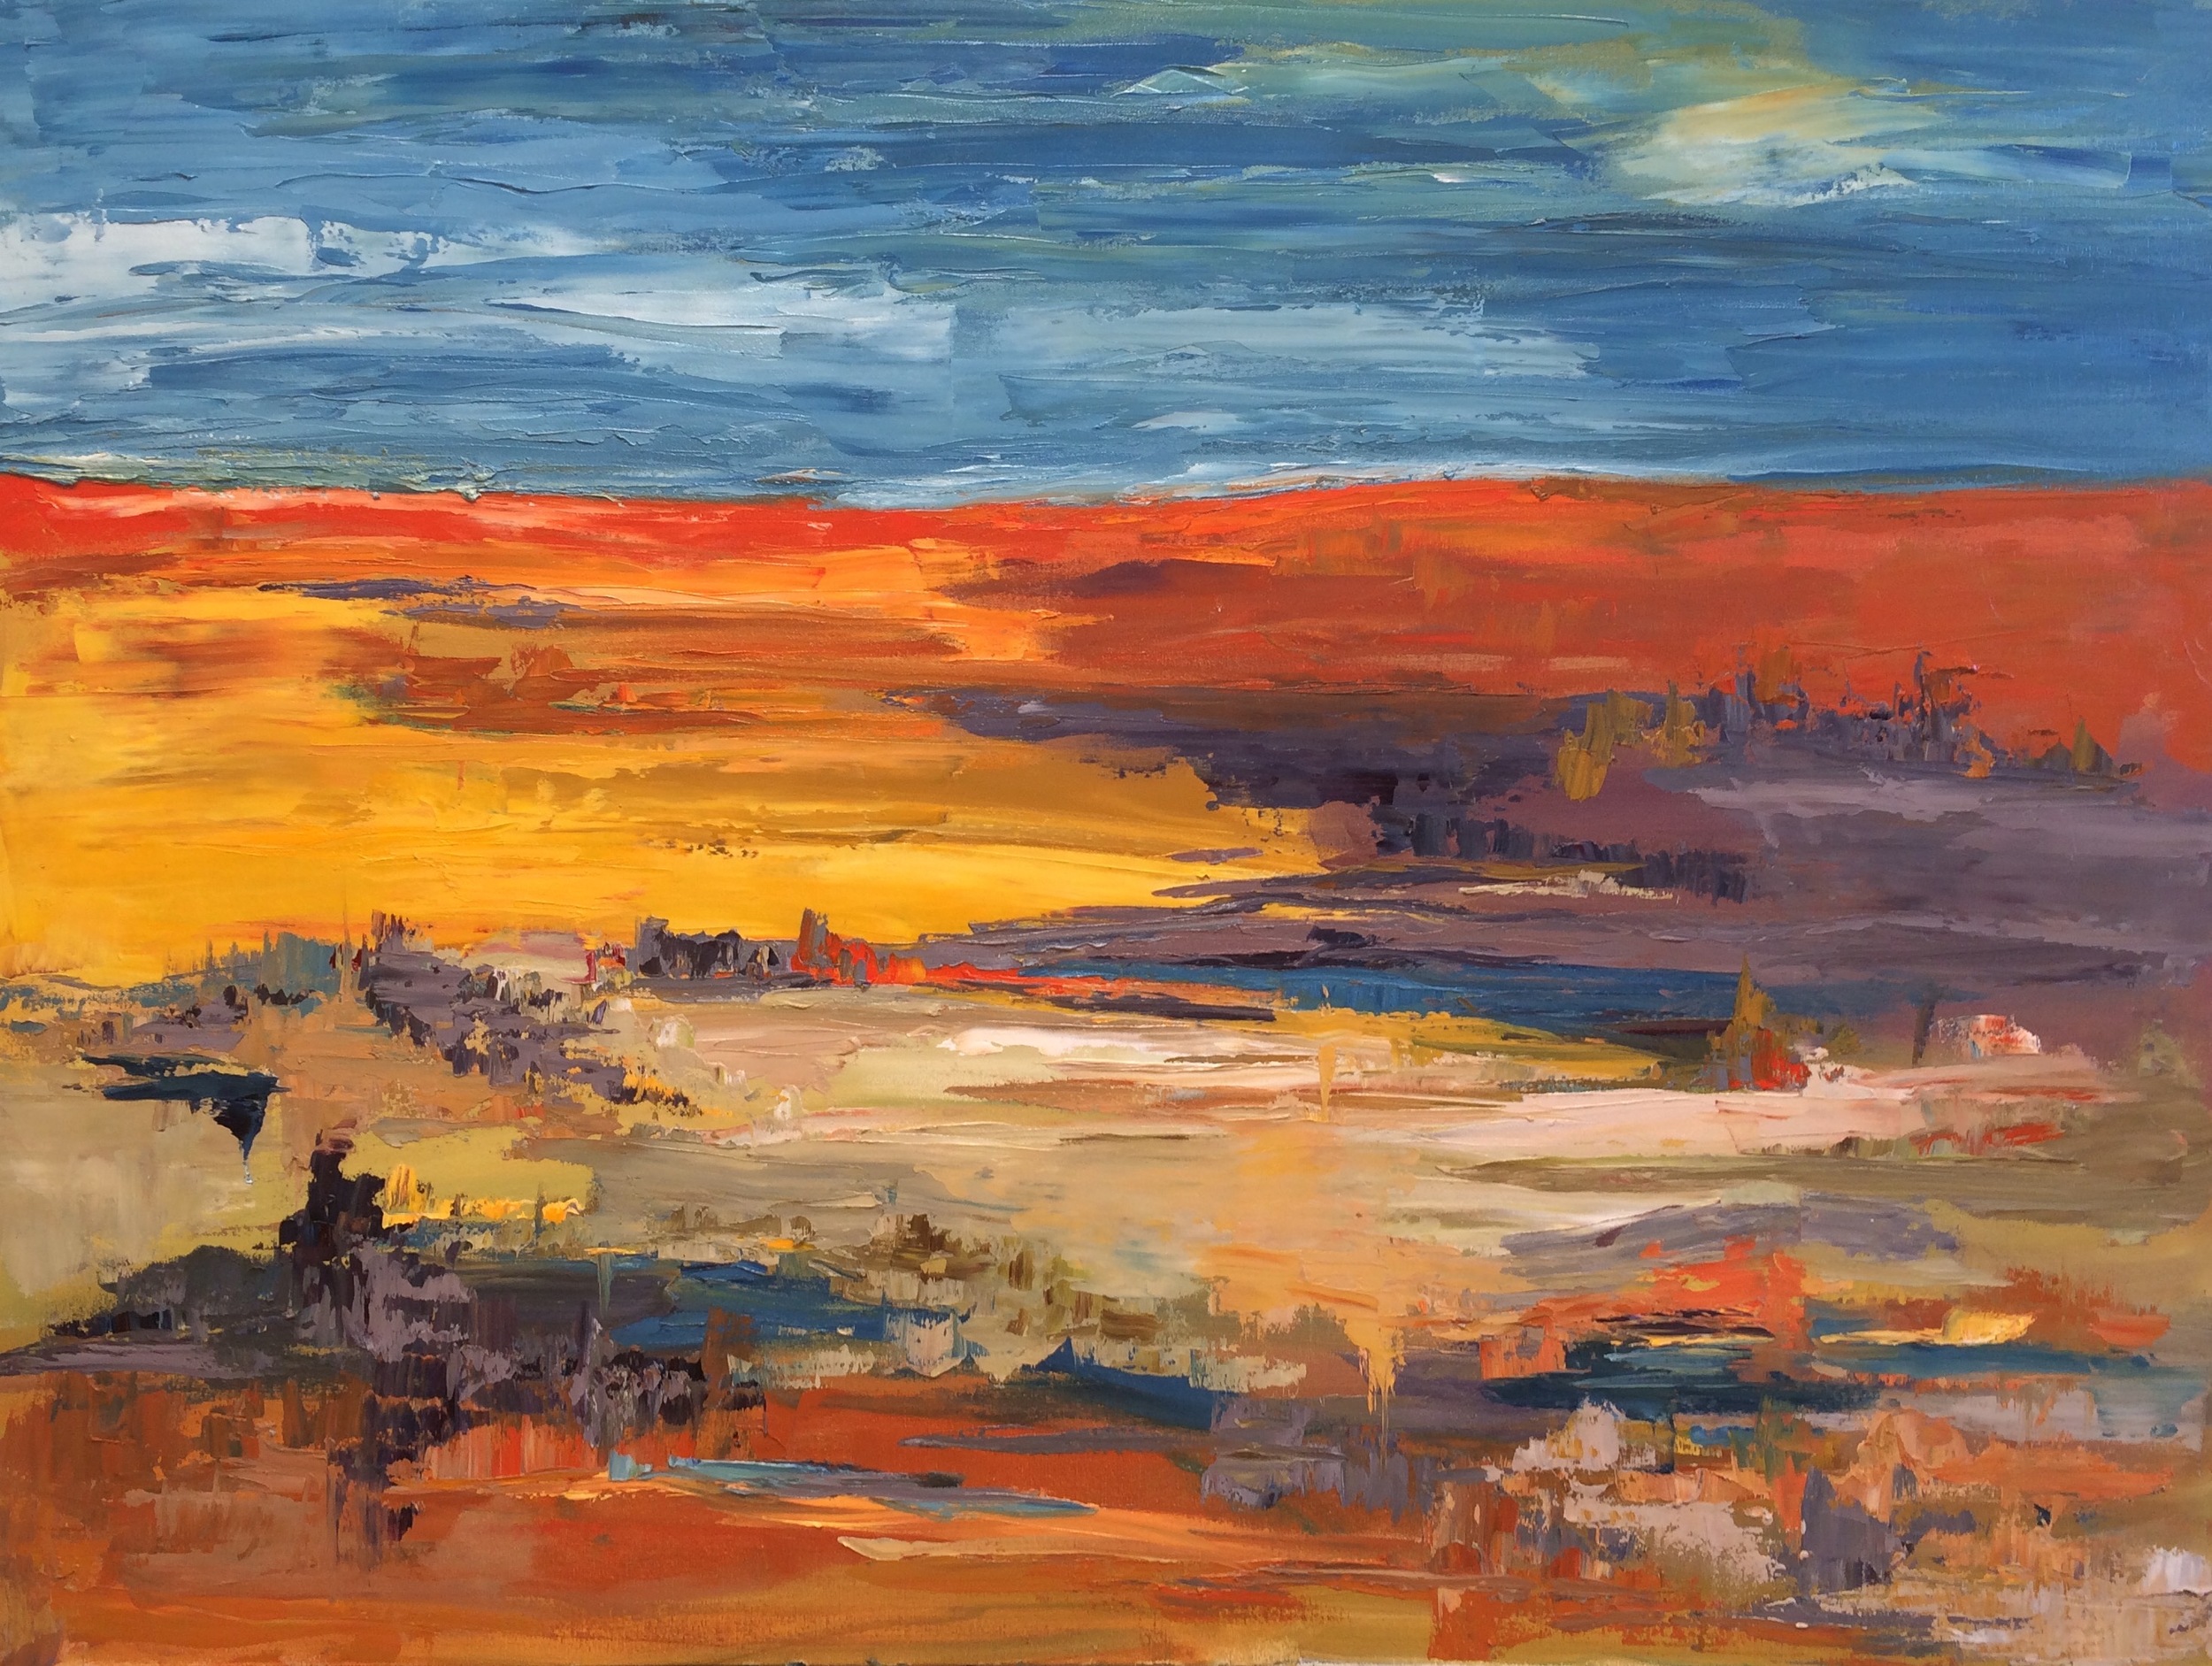 Warm Earth, oil on canvas, 36"x48" SOLD